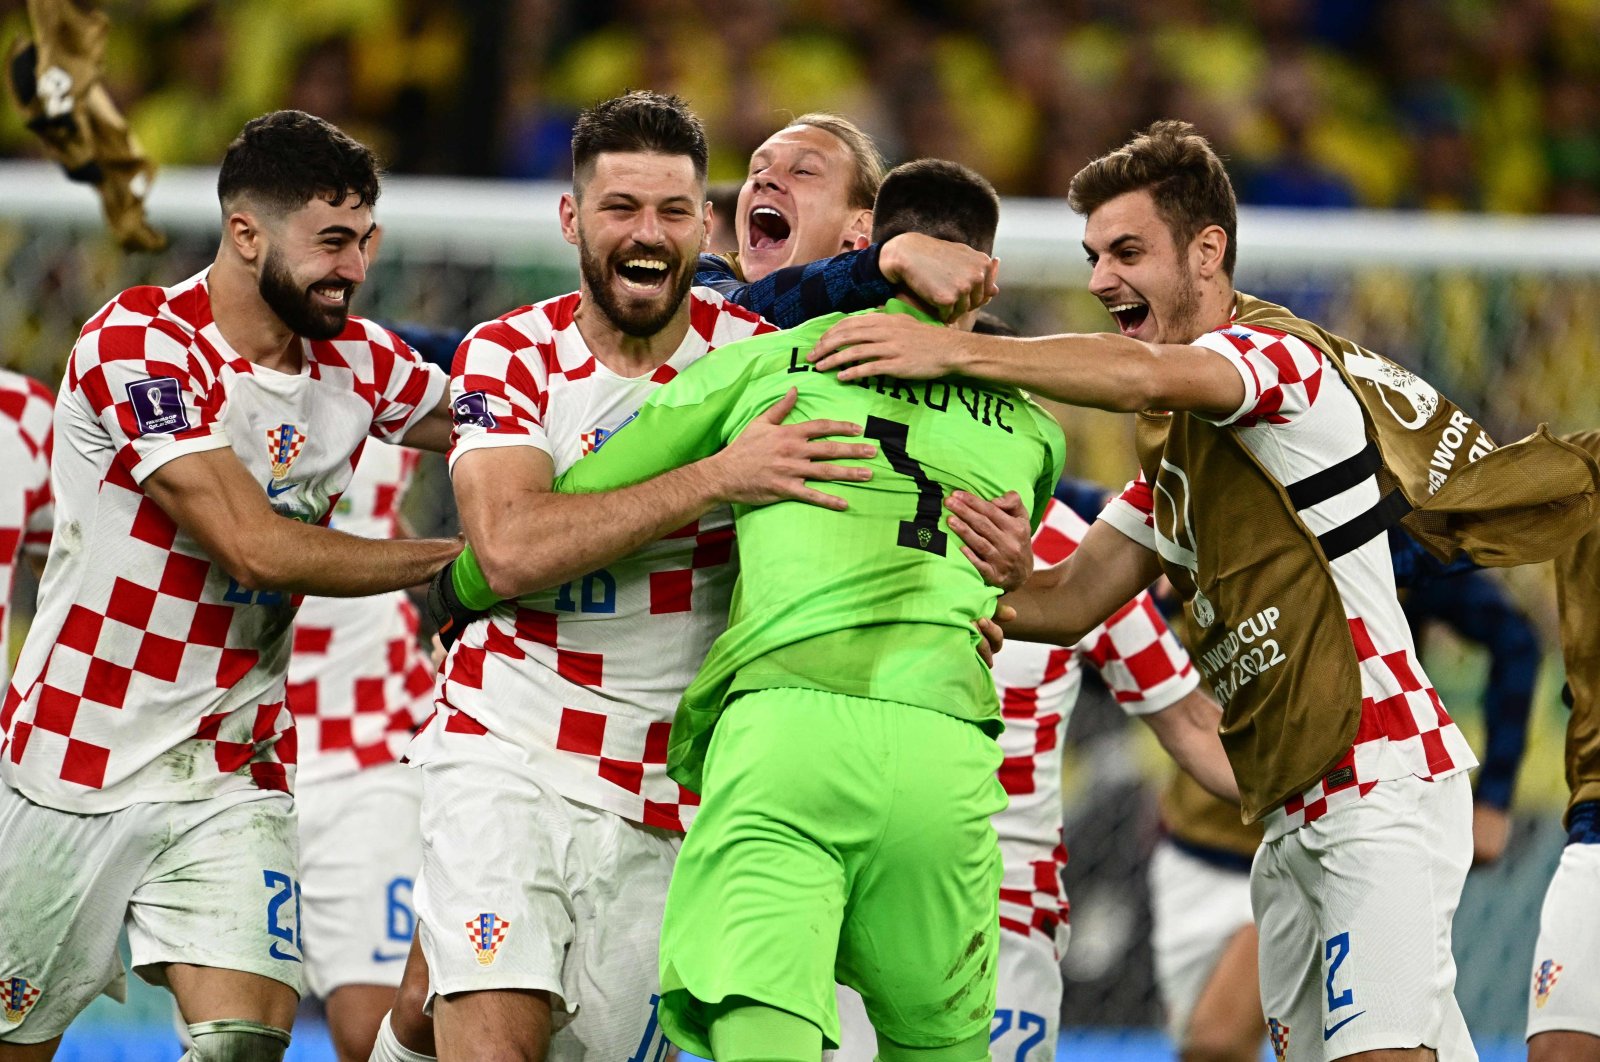 Croatia&#039;s goalkeeper Dominik Livakovic and teammates celebrate after qualifying for the next round after defeating Brazil in the penalty shoot-out of the Qatar 2022 World Cup quarter-final football match between Croatia and Brazil at Education City Stadium in Al-Rayyan, west of Doha, Qatar, Dec. 9, 2022. (AFP Photo)